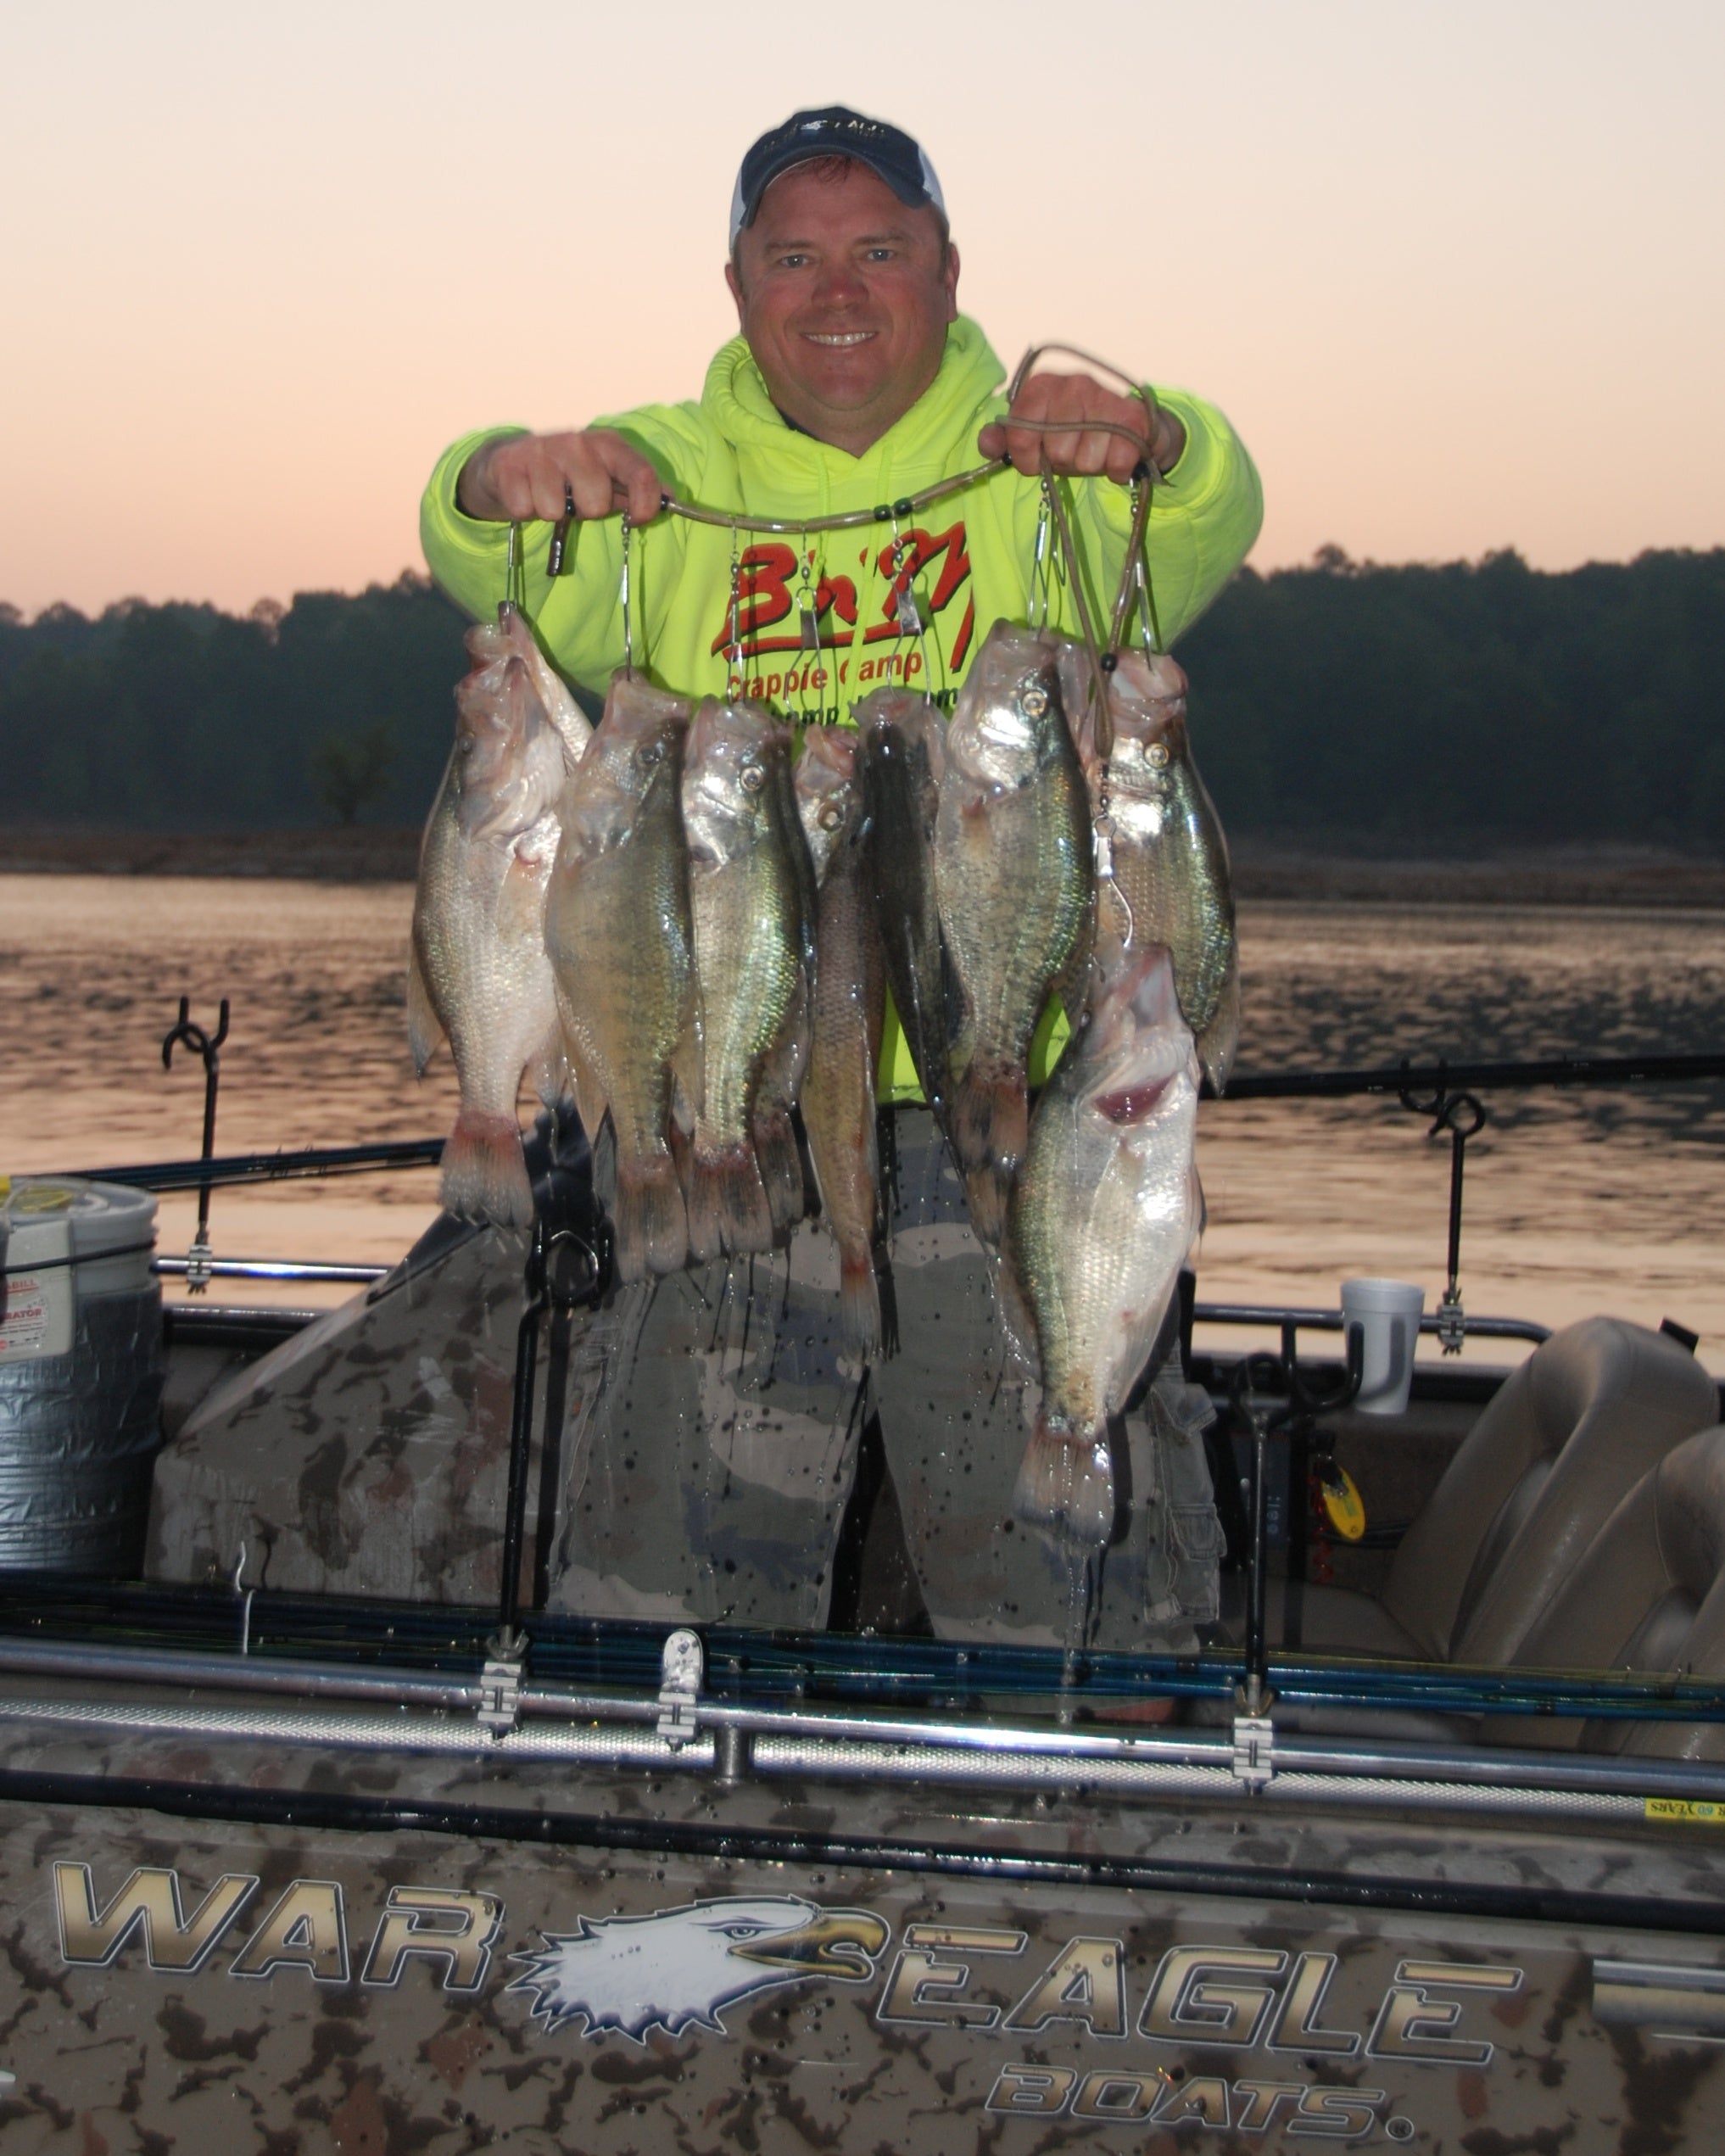 Kent Driscoll On Using the Garmin Panoptix Live Scope to Catch Crappie - Part 1